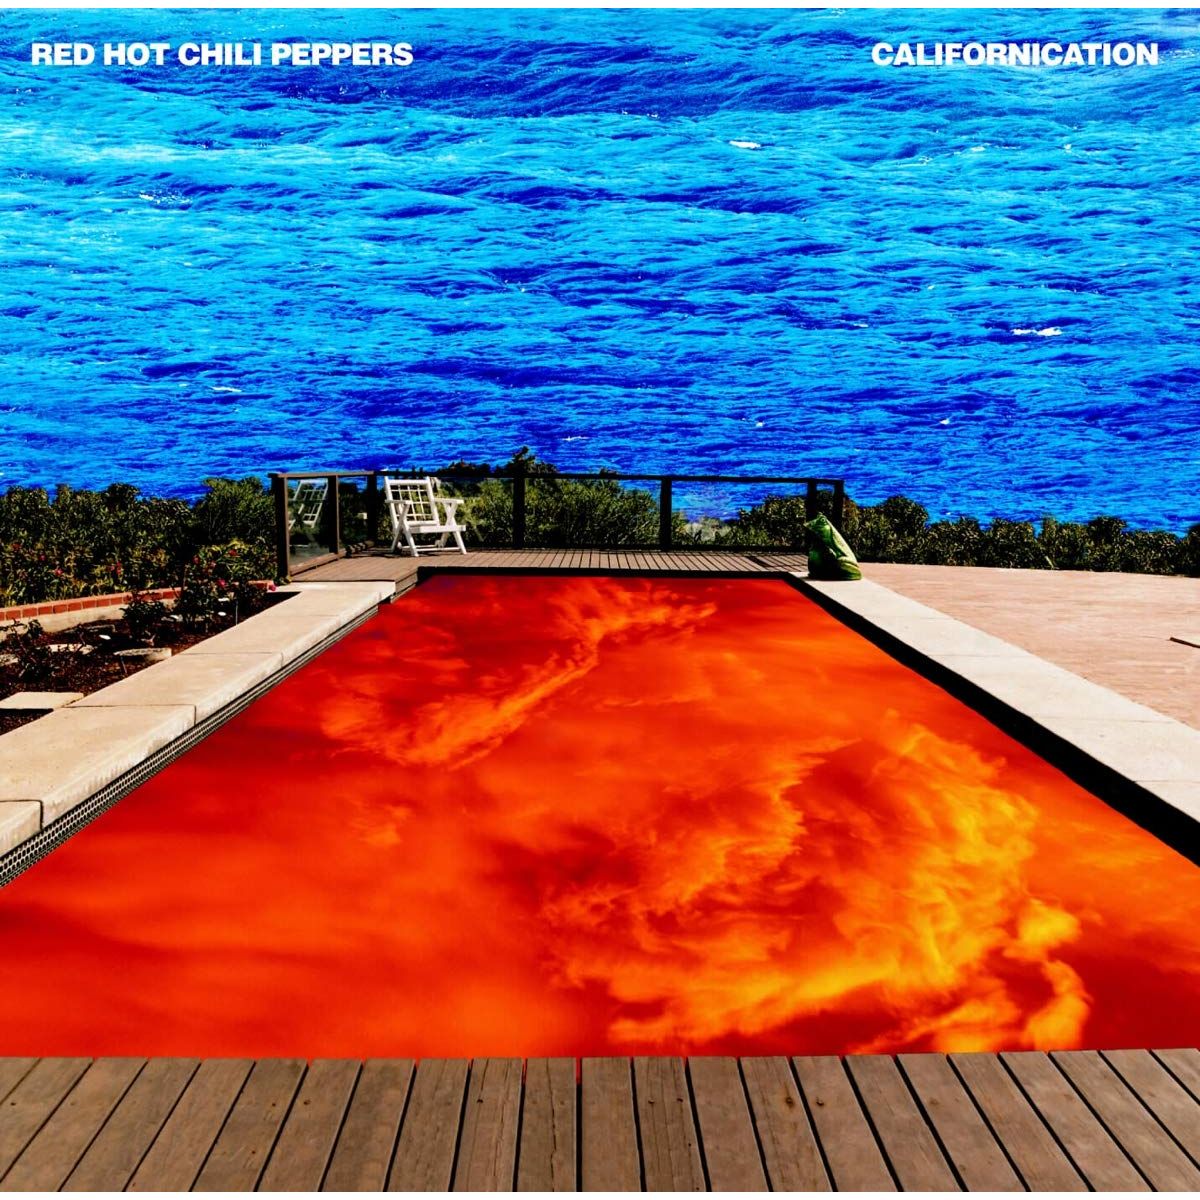 RED HOT CHILI PEPPERS - CALIFORNICATION - DISQUE VINYLE - LP